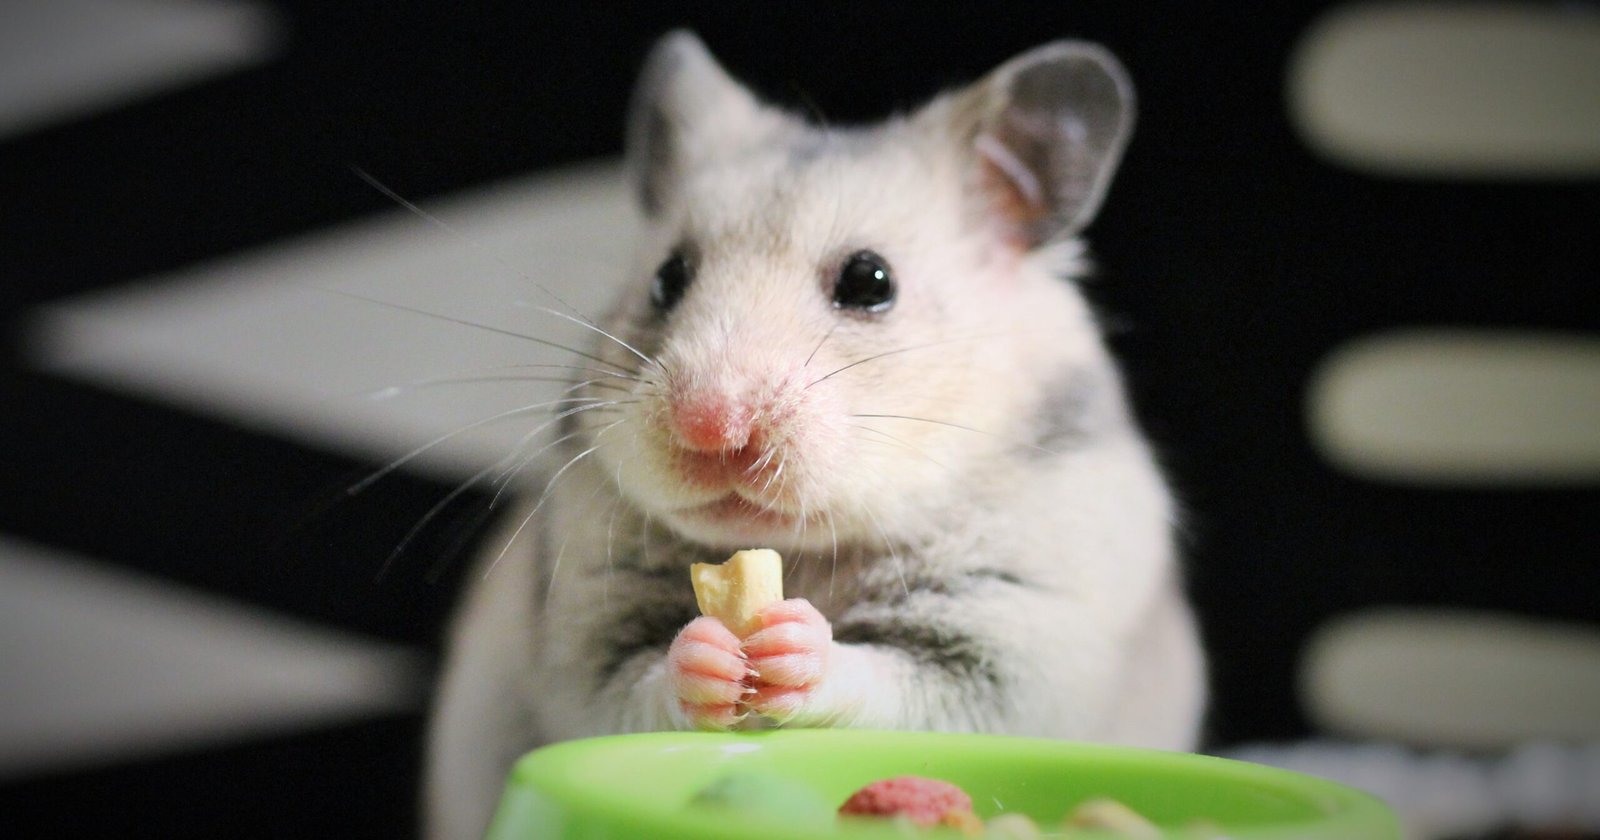 Can Hamsters Eat Cheetos?